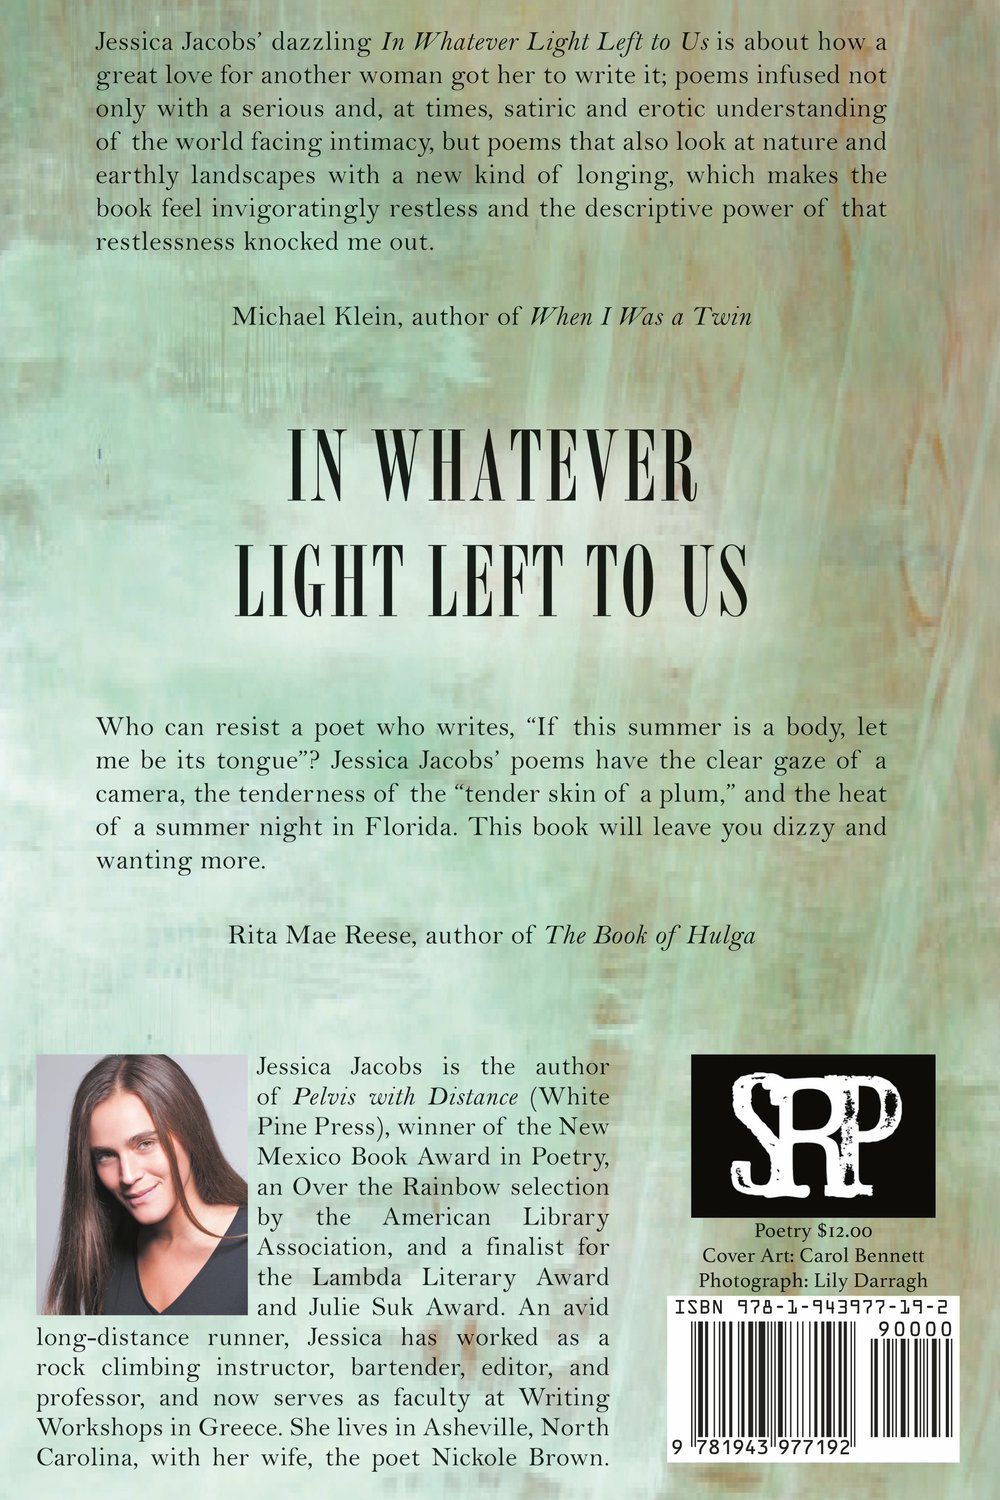 In Whatever Light Left to Us by Jessica Jacobs